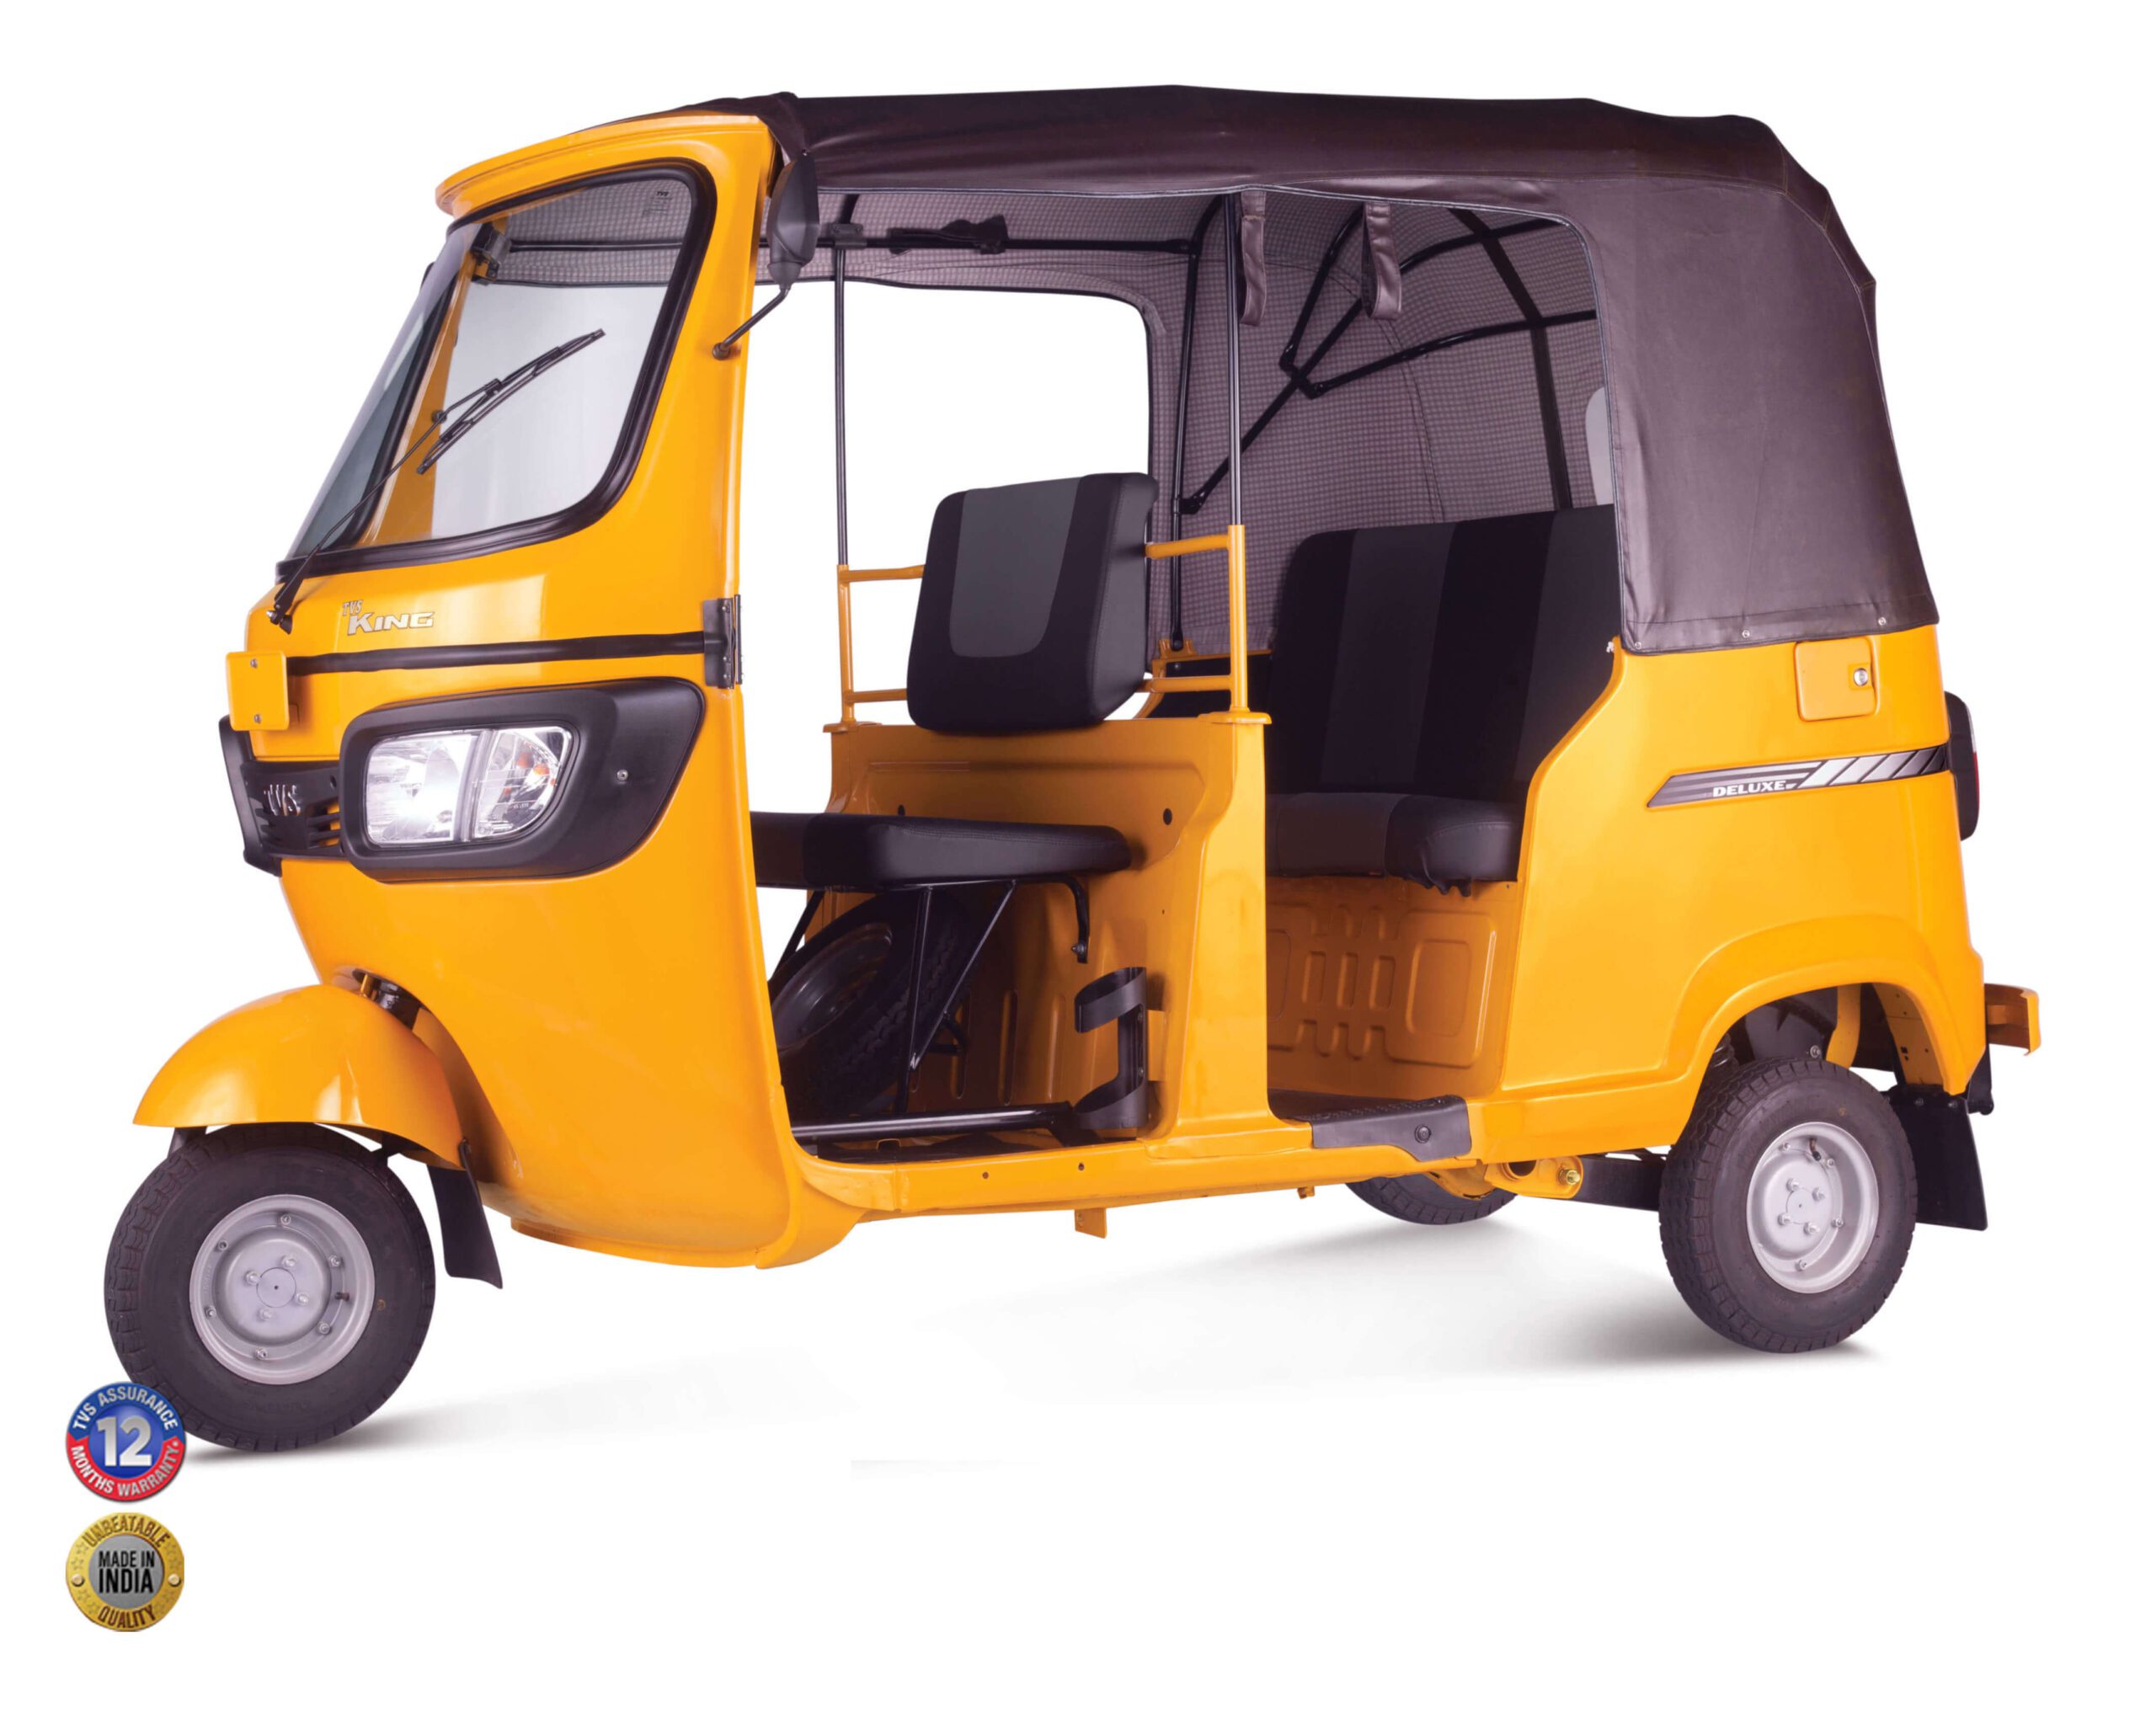 Price of TVS King Deluxe Tricycle in Nigeria